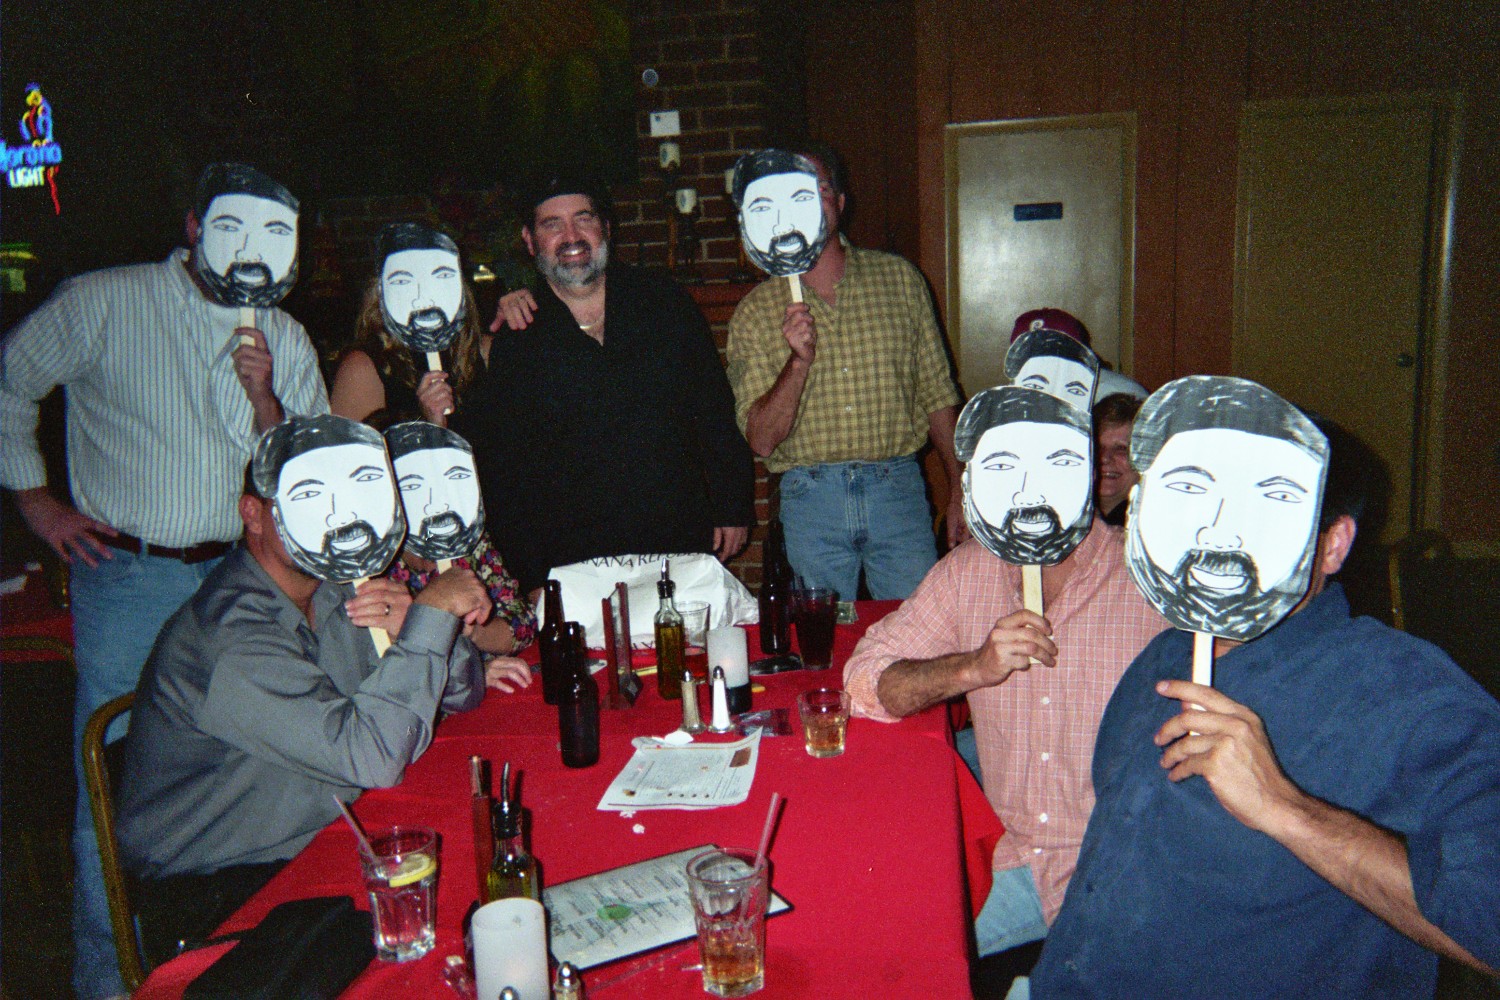 How many Wise Guys are there?
Kirk's cousin Mark Hoffman has way too much time on his hands...surprising the fellow family members with some fun masks...
